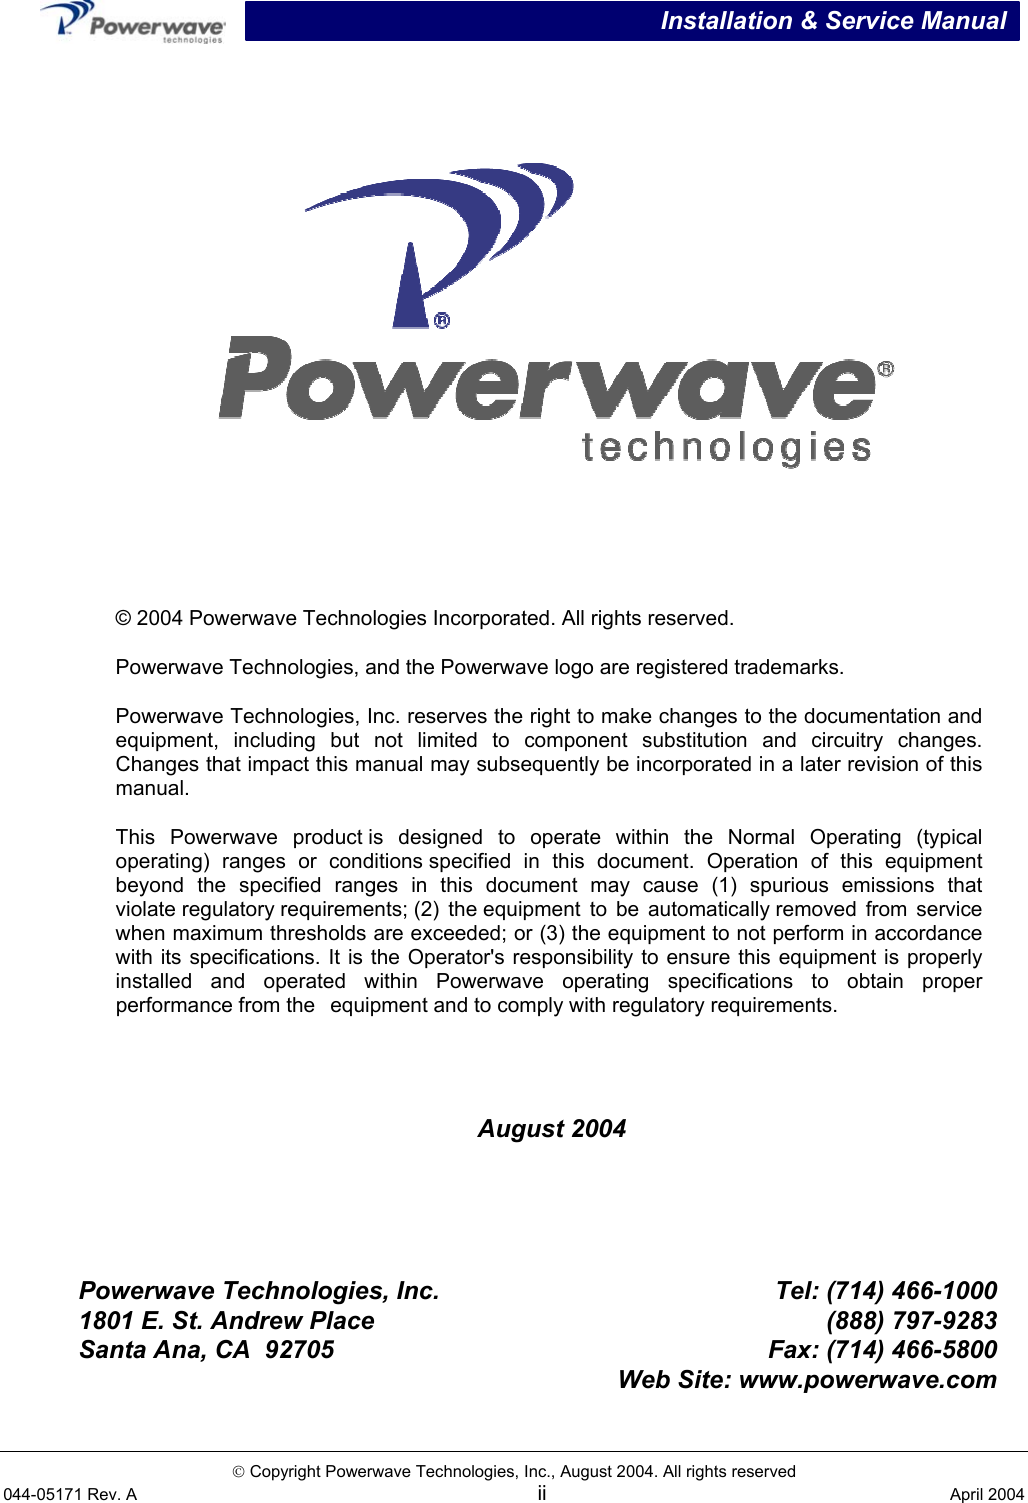  Installation &amp; Service Manual   Copyright Powerwave Technologies, Inc., August 2004. All rights reserved 044-05171 Rev. A ii  April 2004     August 2004      Powerwave Technologies, Inc. Tel: (714) 466-1000 1801 E. St. Andrew Place  (888) 797-9283 Santa Ana, CA  92705 Fax: (714) 466-5800  Web Site: www.powerwave.com   © 2004 Powerwave Technologies Incorporated. All rights reserved. Powerwave Technologies, and the Powerwave logo are registered trademarks. Powerwave Technologies, Inc. reserves the right to make changes to the documentation and equipment, including but not limited to component substitution and circuitry changes.Changes that impact this manual may subsequently be incorporated in a later revision of thismanual. This Powerwave product is designed to operate within the Normal Operating (typical operating) ranges or conditions specified in this document. Operation of this equipment beyond the specified ranges in this document may cause (1) spurious emissions that violate regulatory requirements; (2)  the equipment to be automatically removed from service when maximum thresholds are exceeded; or (3) the equipment to not perform in accordancewith its specifications. It is the Operator&apos;s responsibility to ensure this equipment is properly installed and operated within Powerwave operating specifications to obtain proper performance from the equipment and to comply with regulatory requirements. 